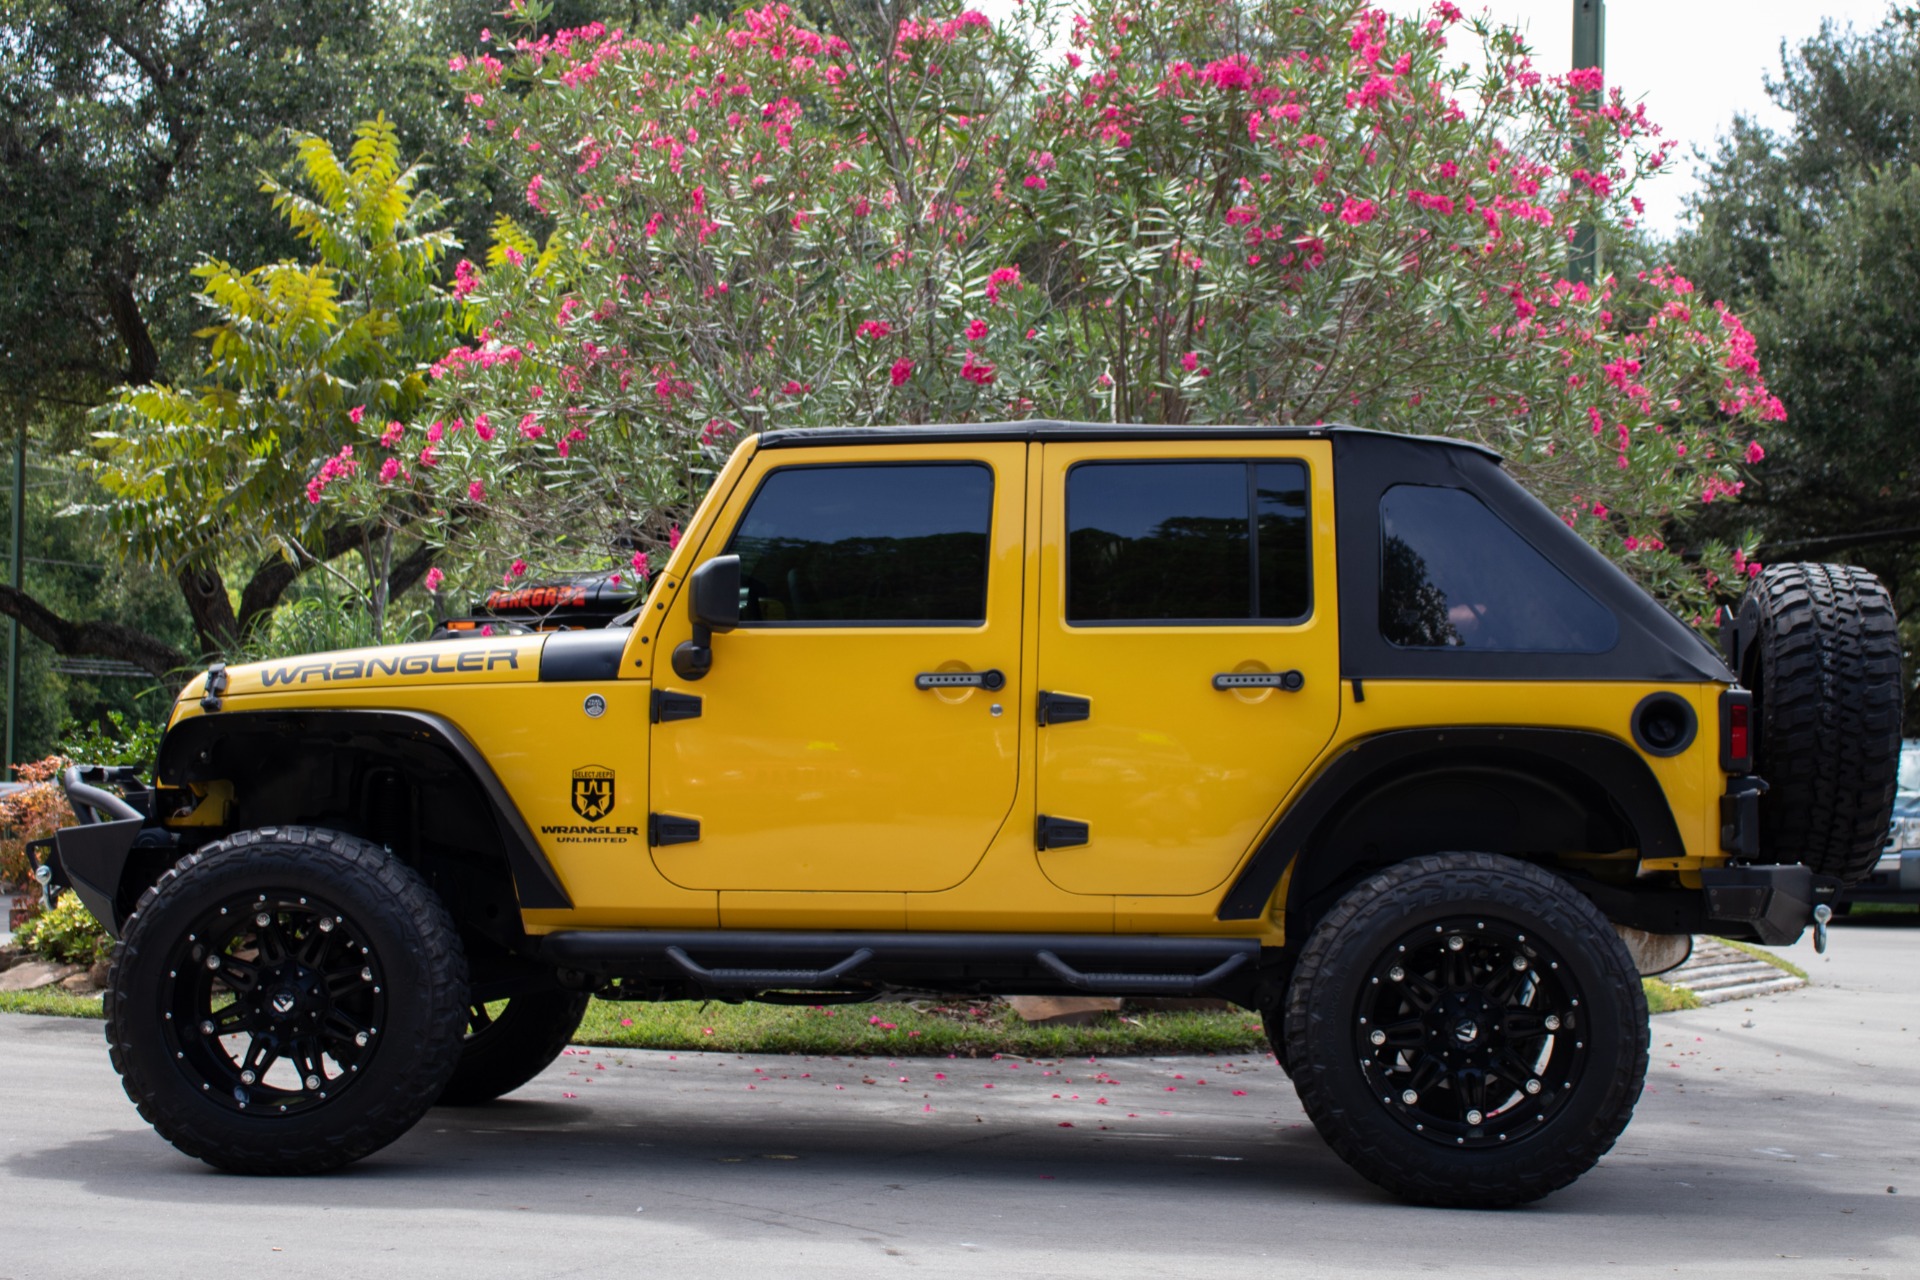 Used 2008 Jeep Wrangler Unlimited X For Sale ($21,995) | Select Jeeps Inc.  Stock #586014